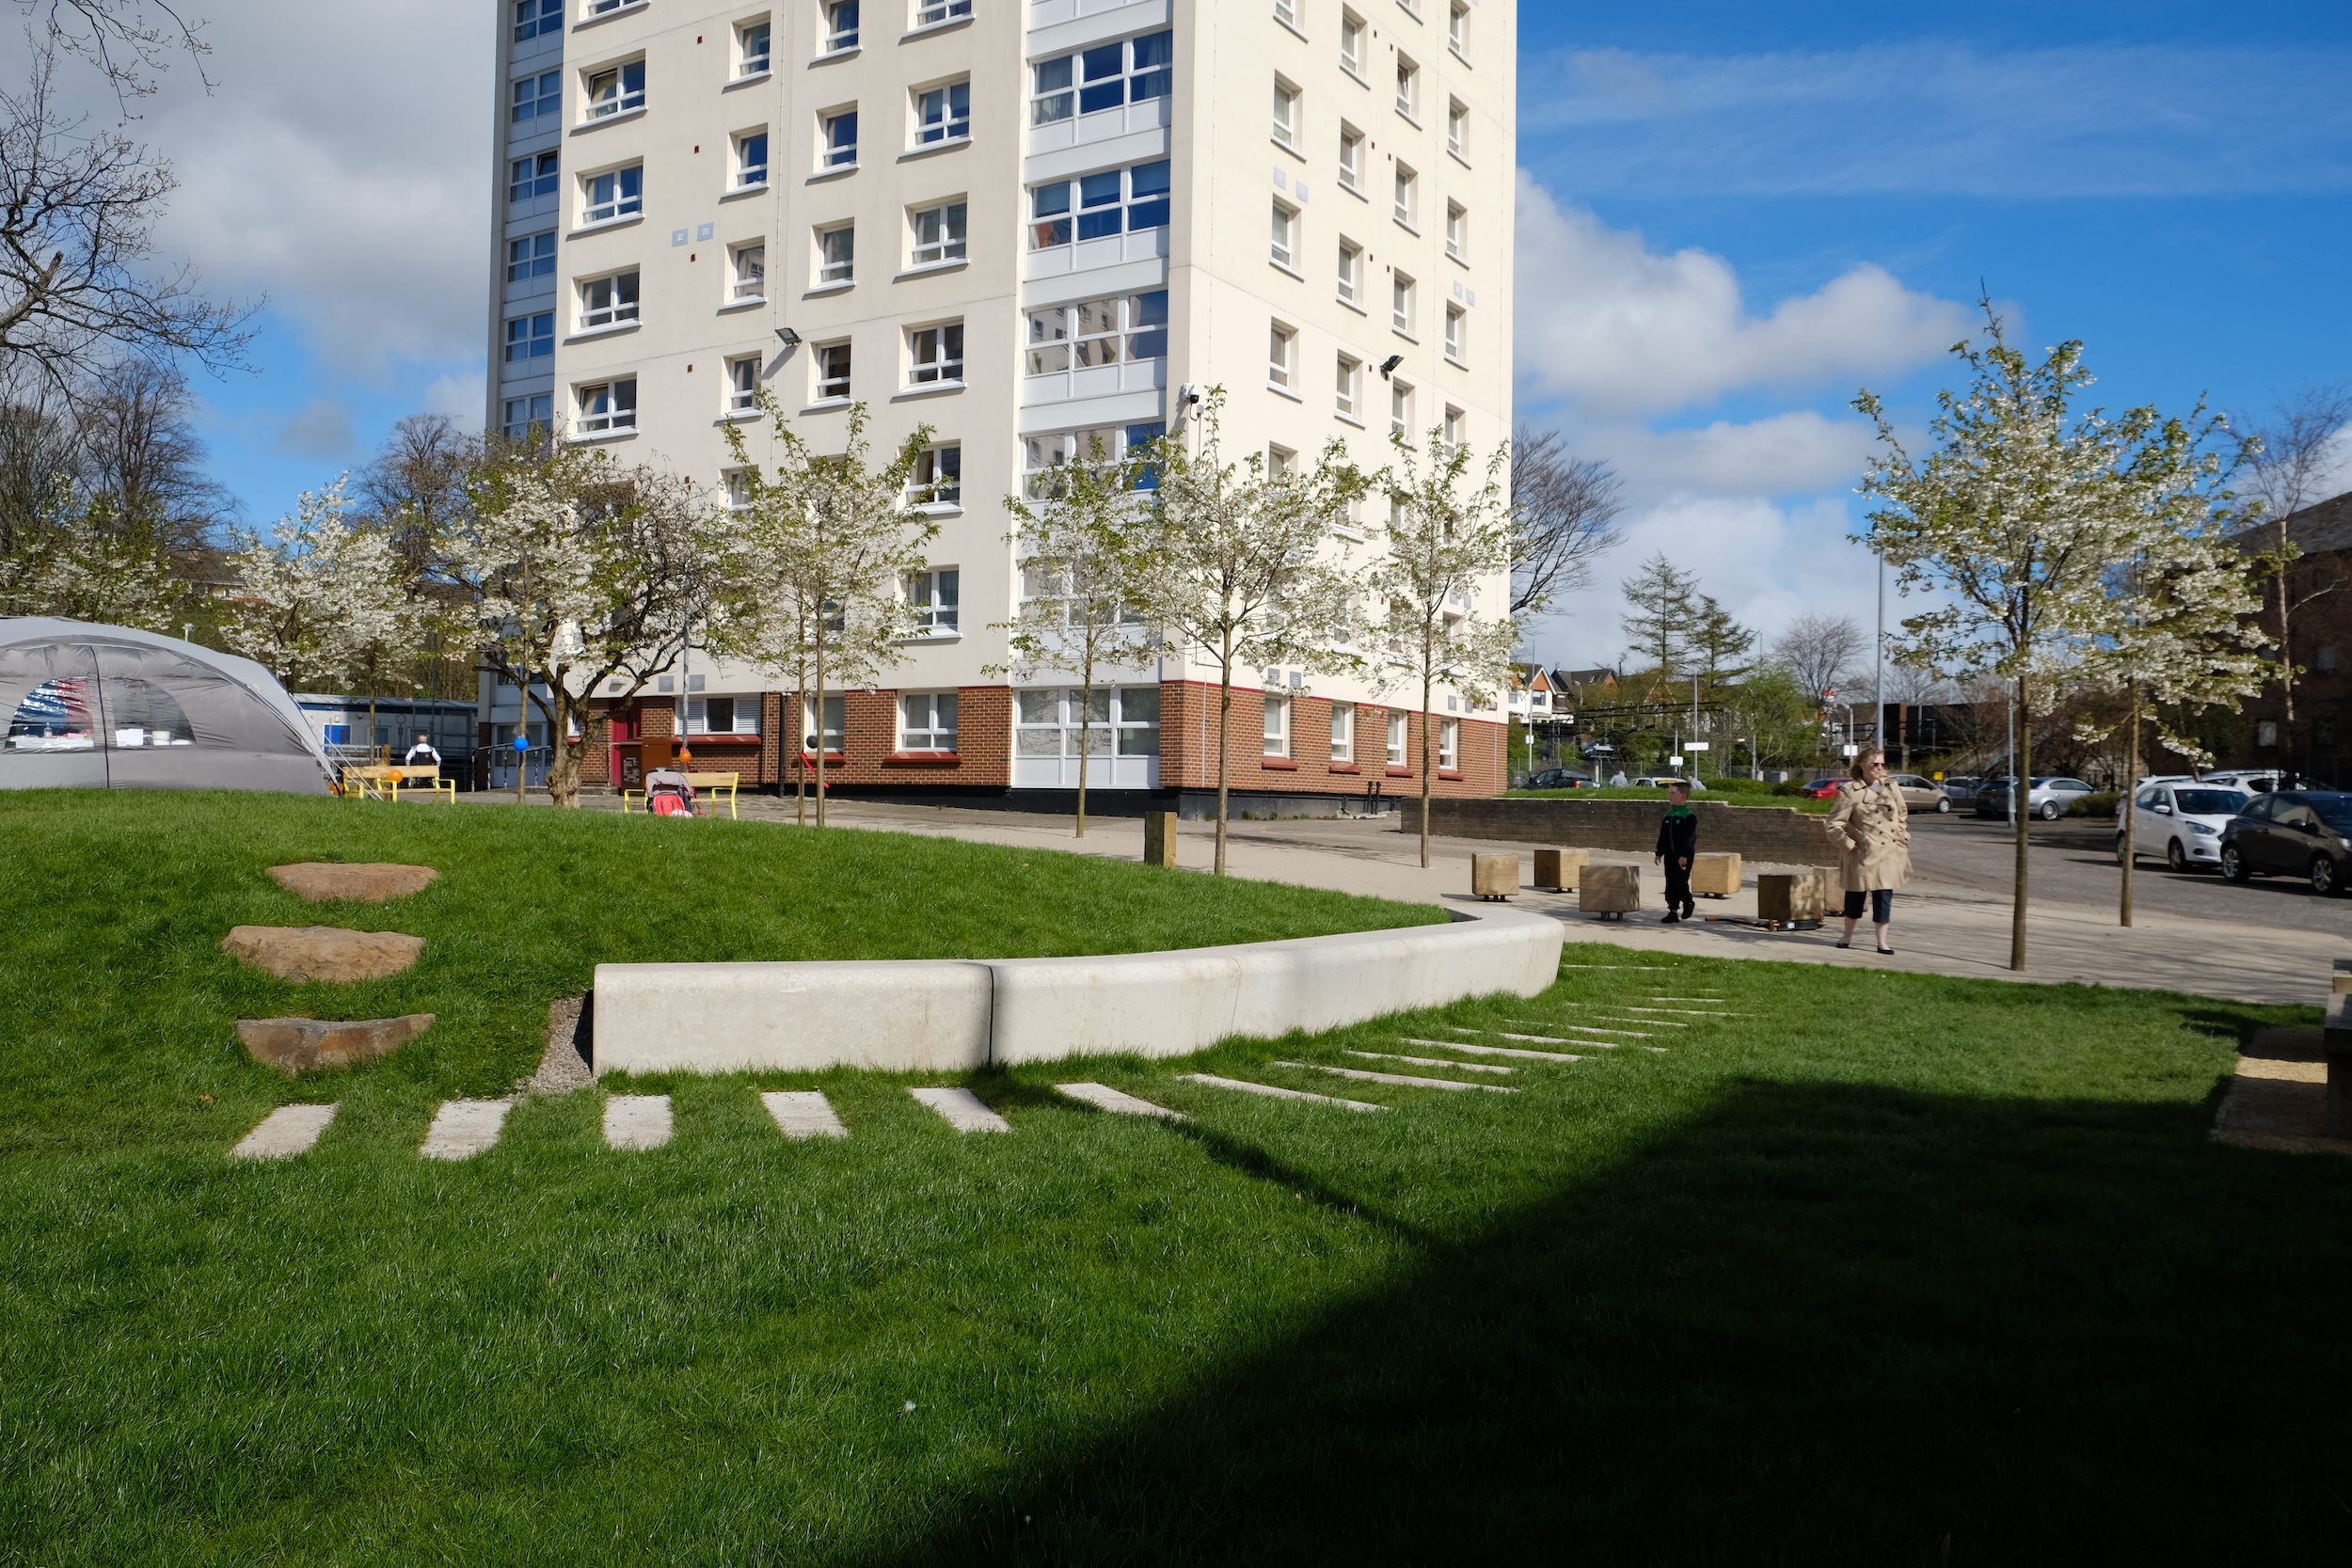 Dalmuir housing, community greenspace and seating, erz